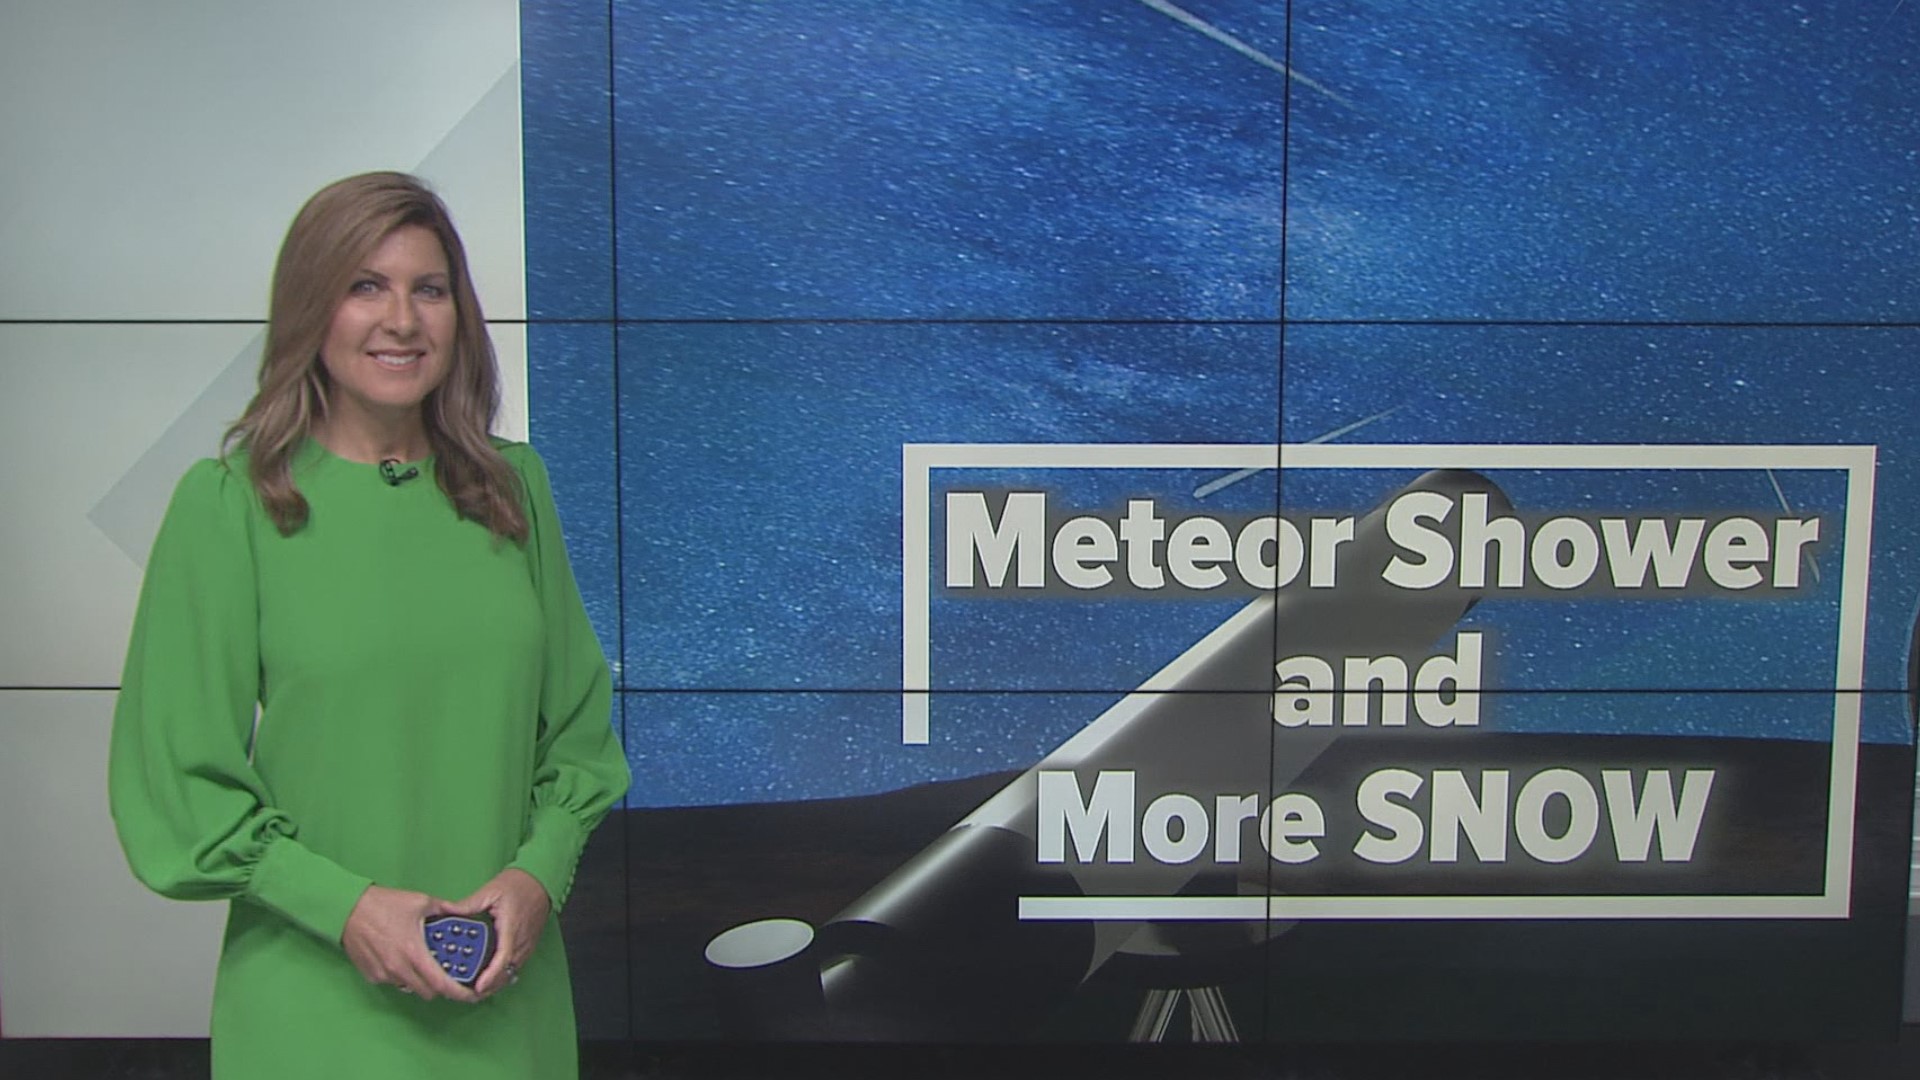 Our second biggest meteor shower of the year will peak this week, but with showers in the forecast, Monica Woods is tracking the best time to view the Lyrids.